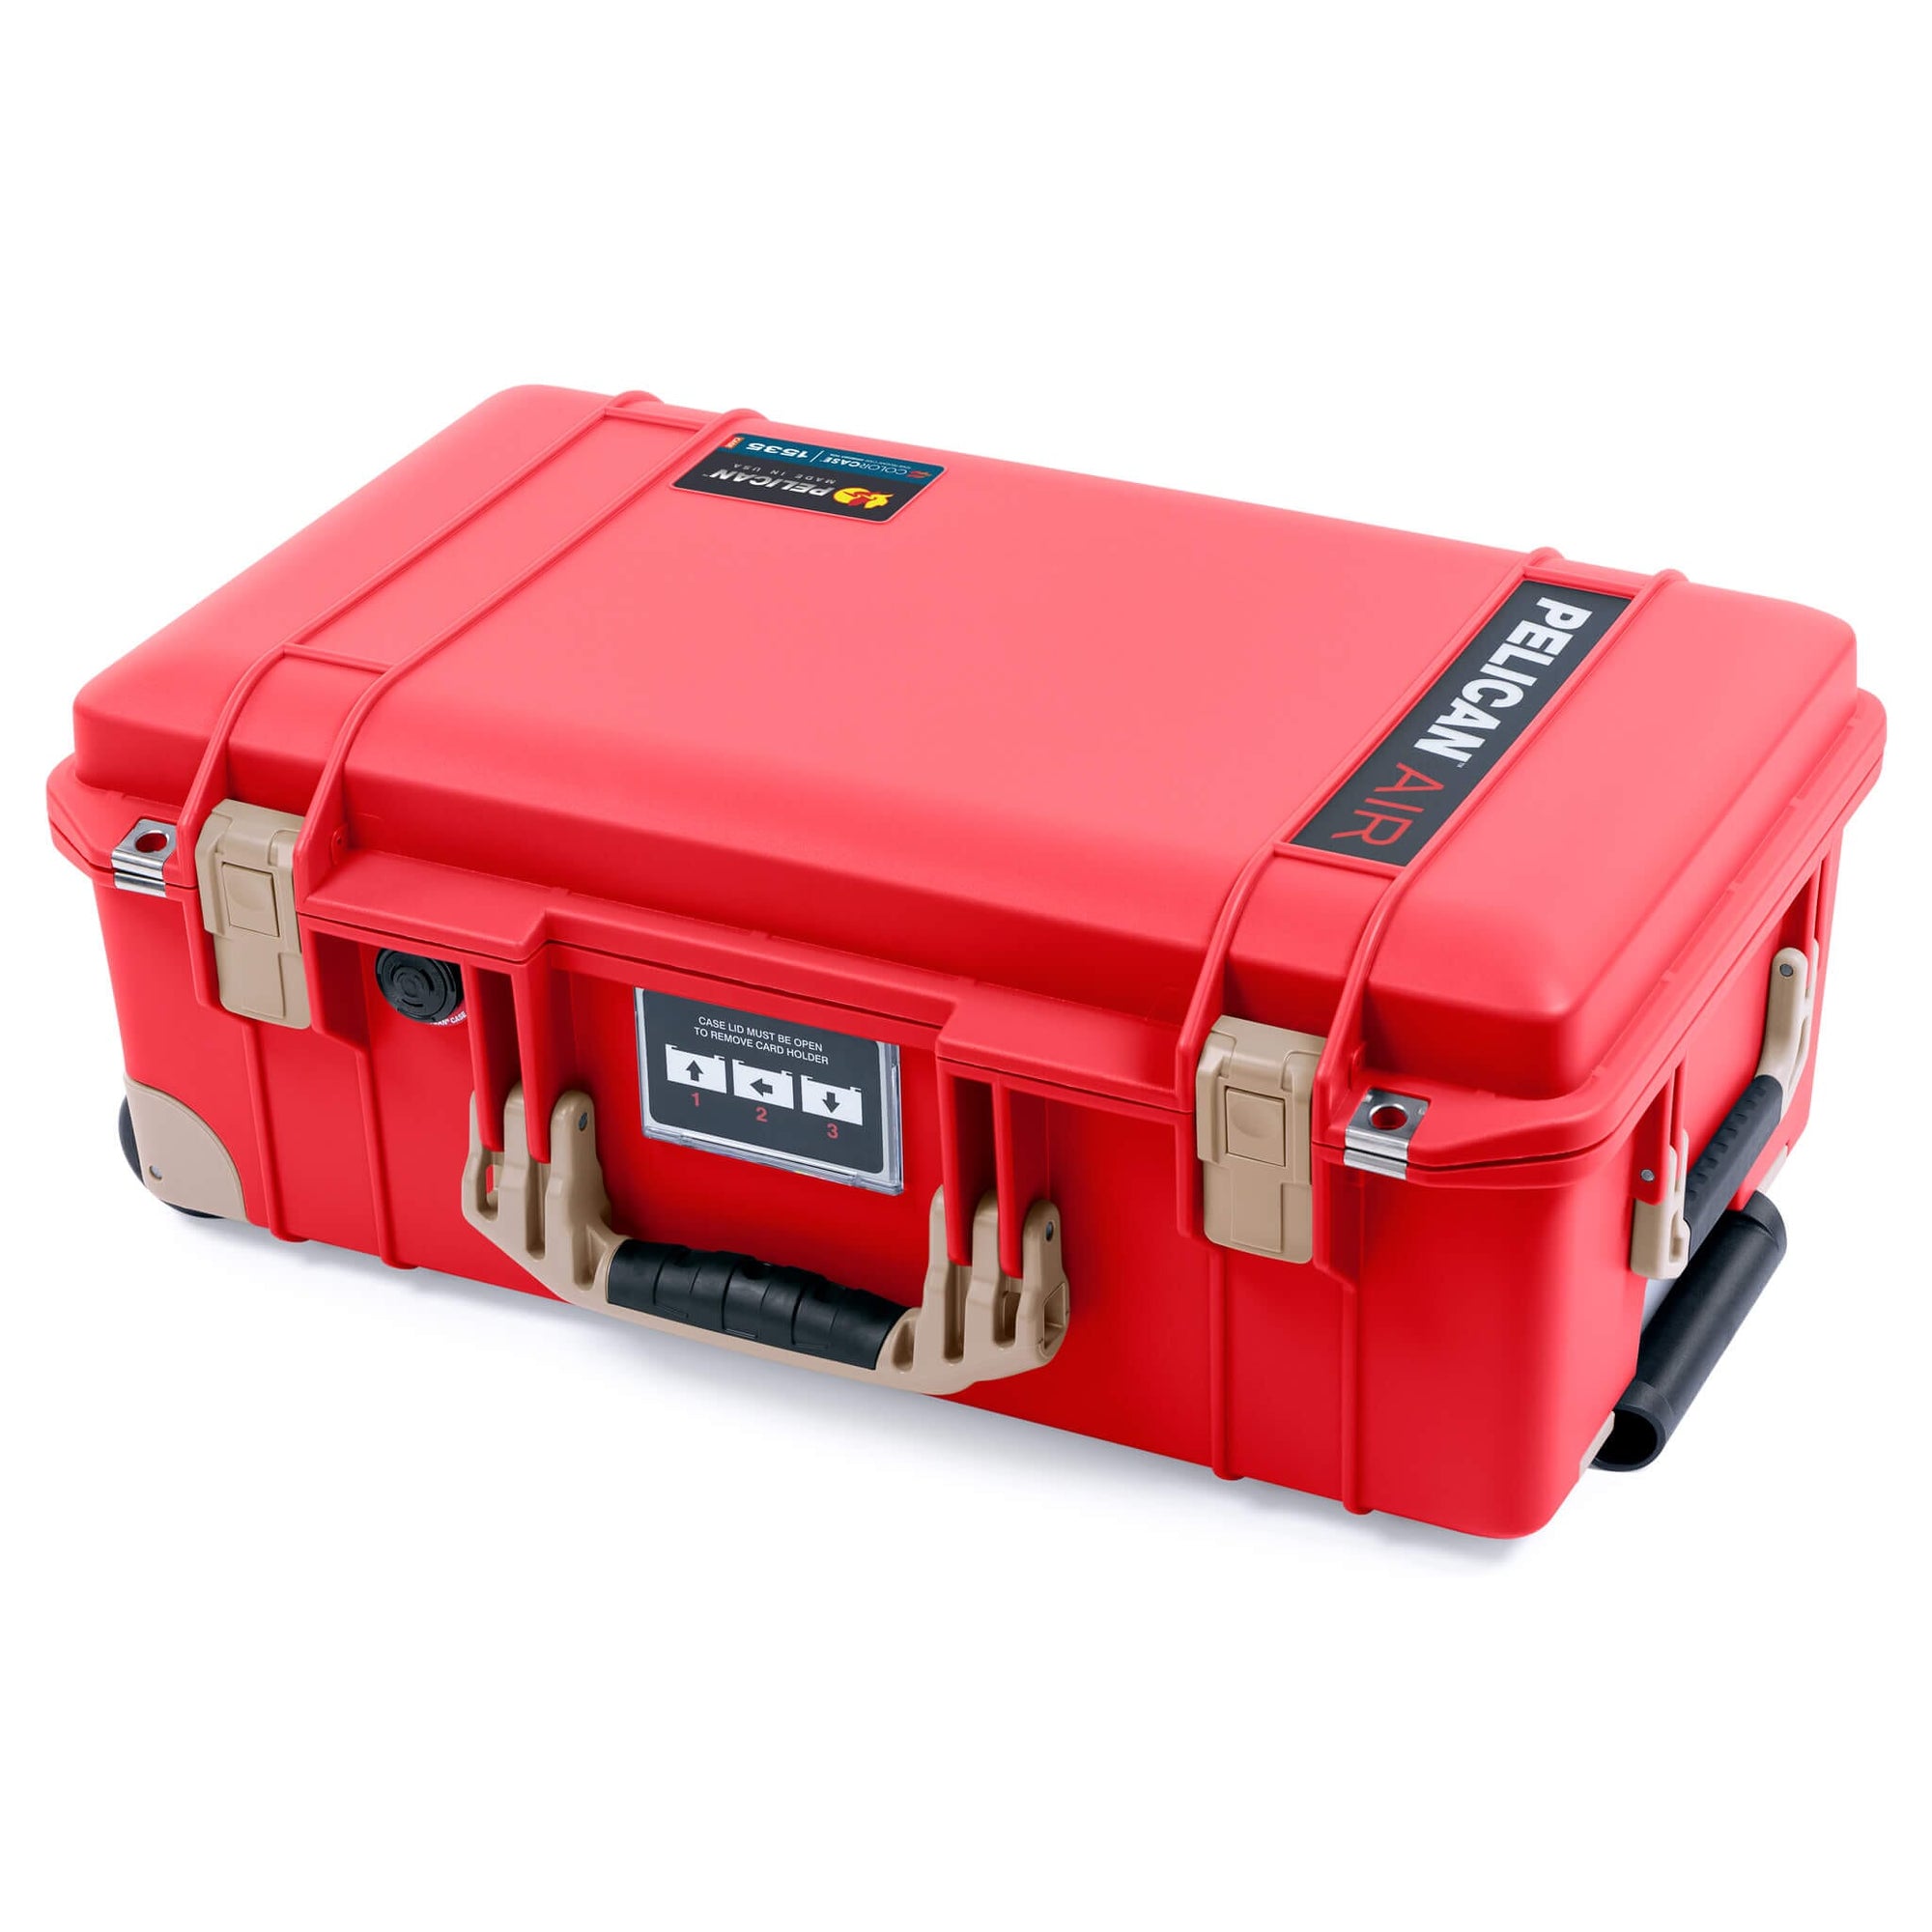 Pelican 1535 Air Case, Red with Desert Tan Handles, Latches & Trolley ColorCase 